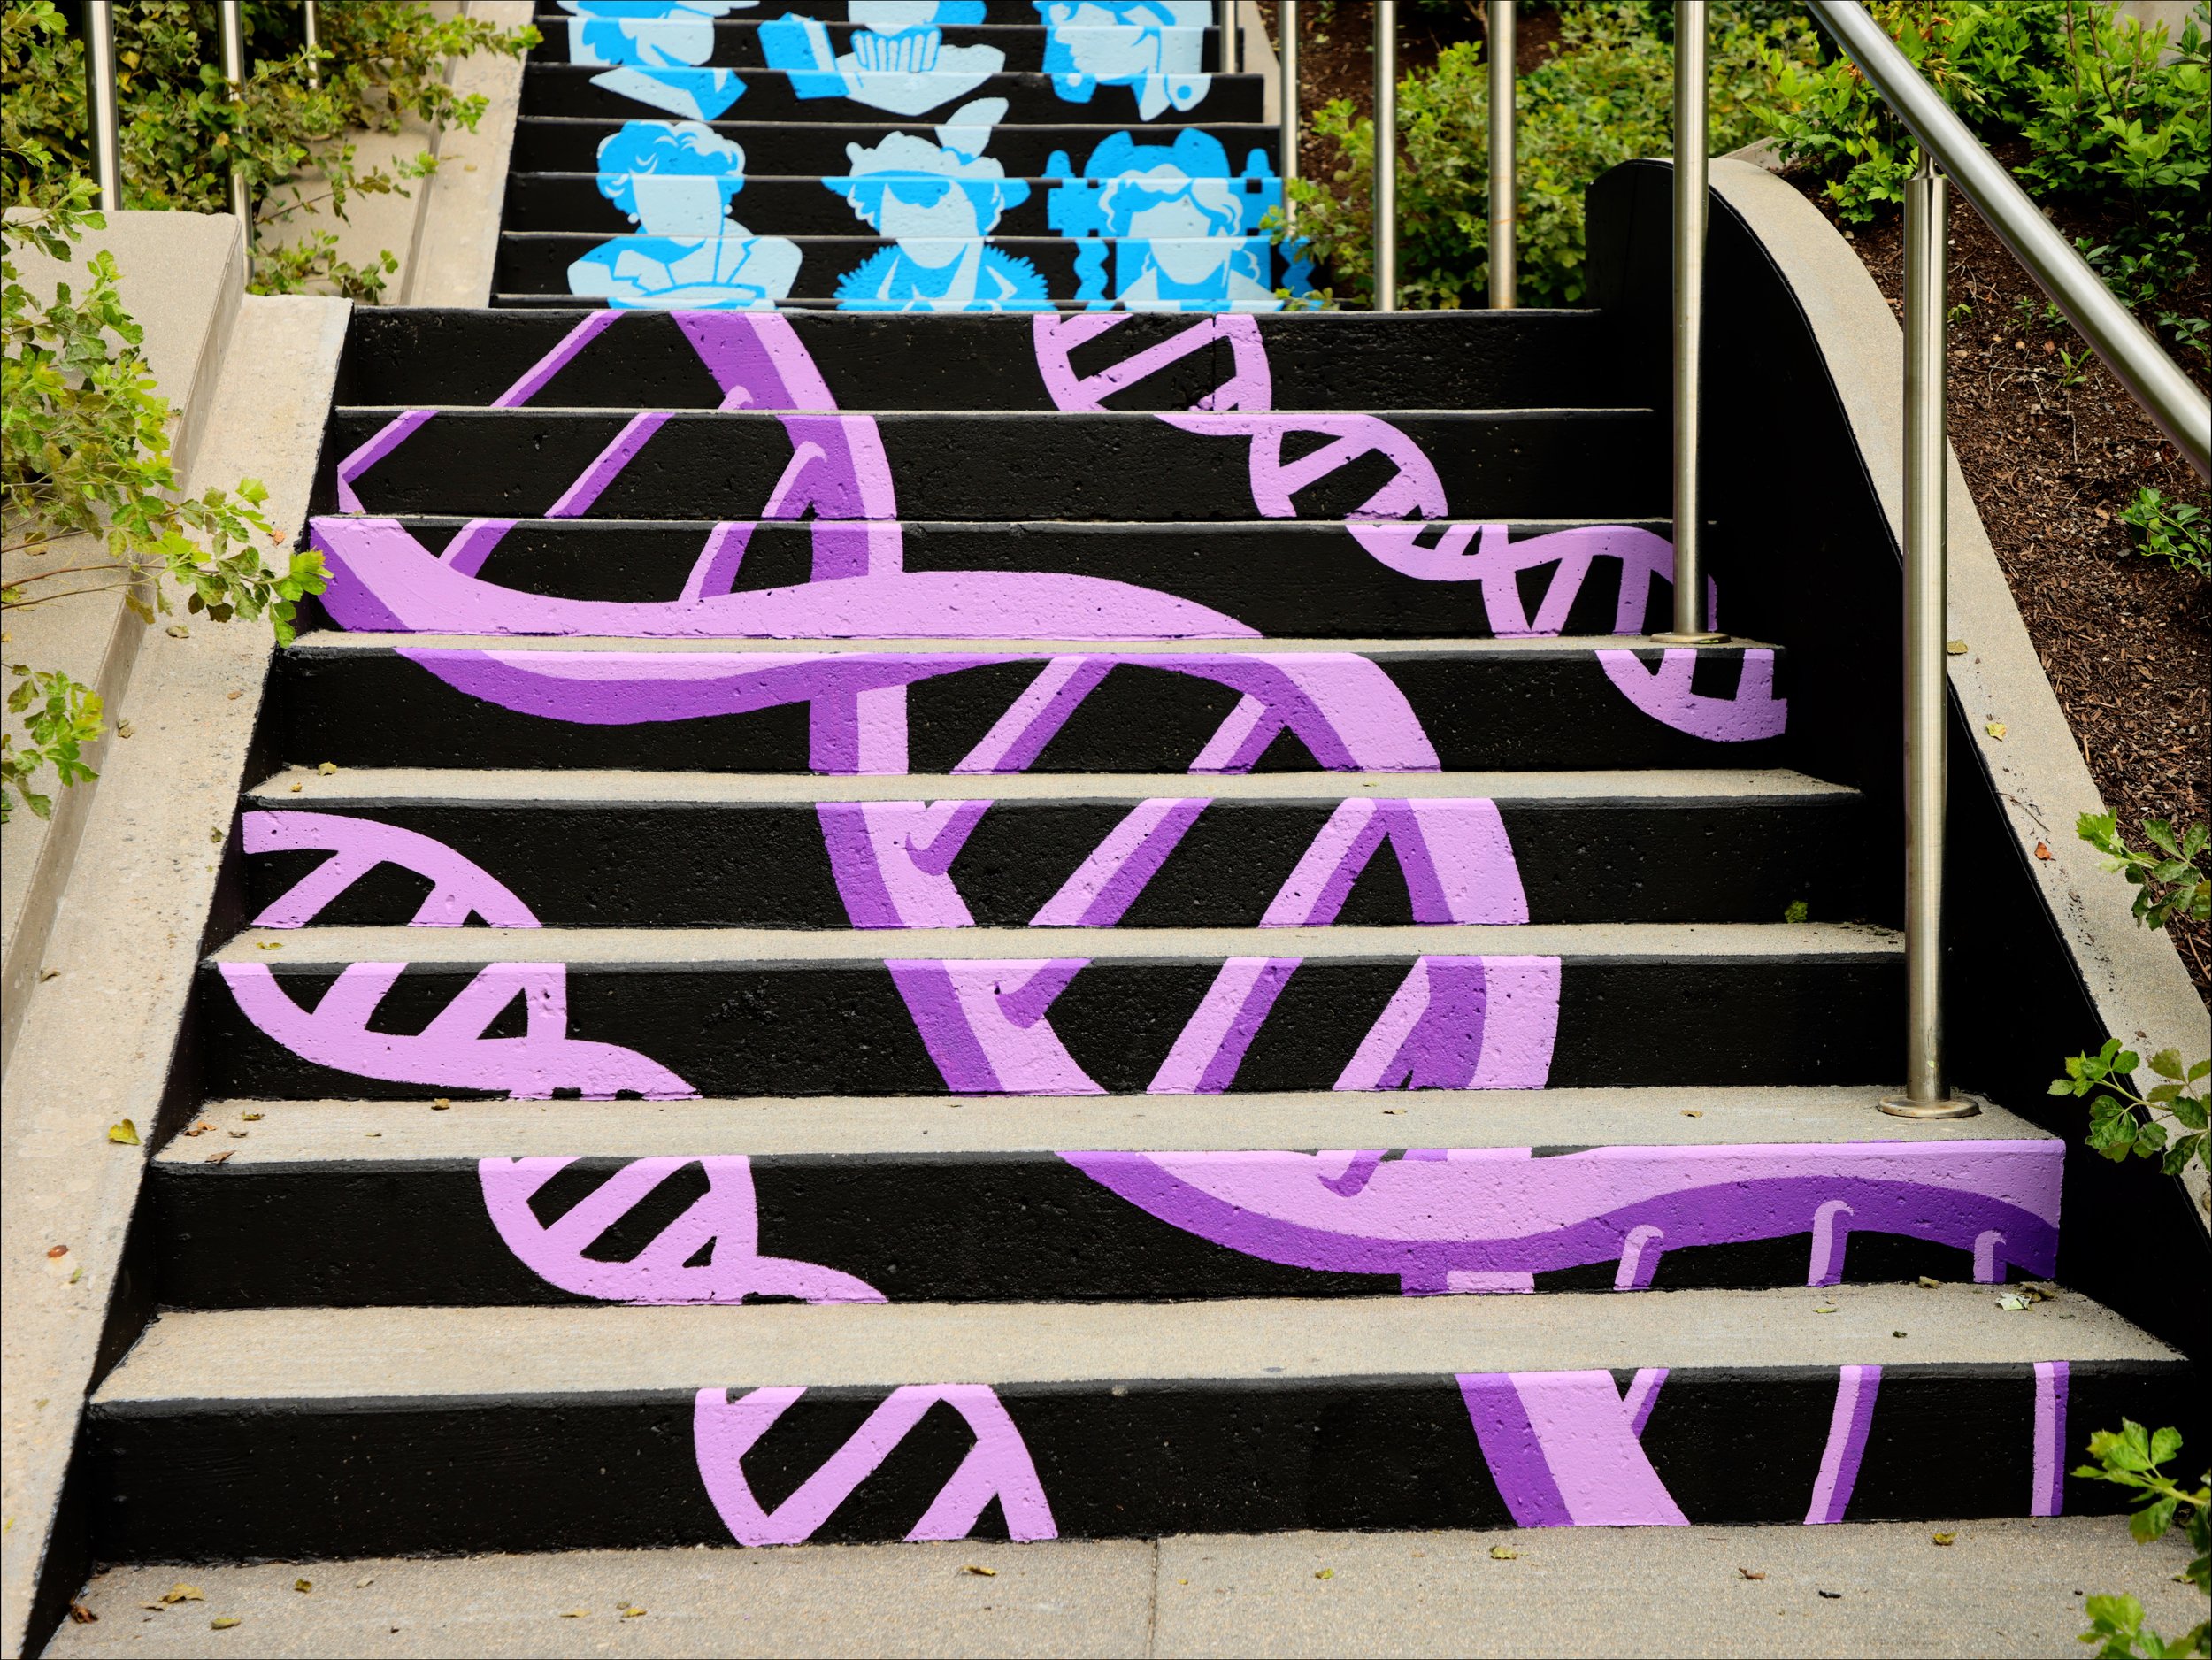  Image crediting: Michael Talbot &amp; Phoebe Warner,  Collective Ascension , 2023. Site-specific mural. Brian P. Murphy Memorial Staircase, Cambridge, MA. Project executed in collaboration with Community Art Center and facilitated by art_works for D